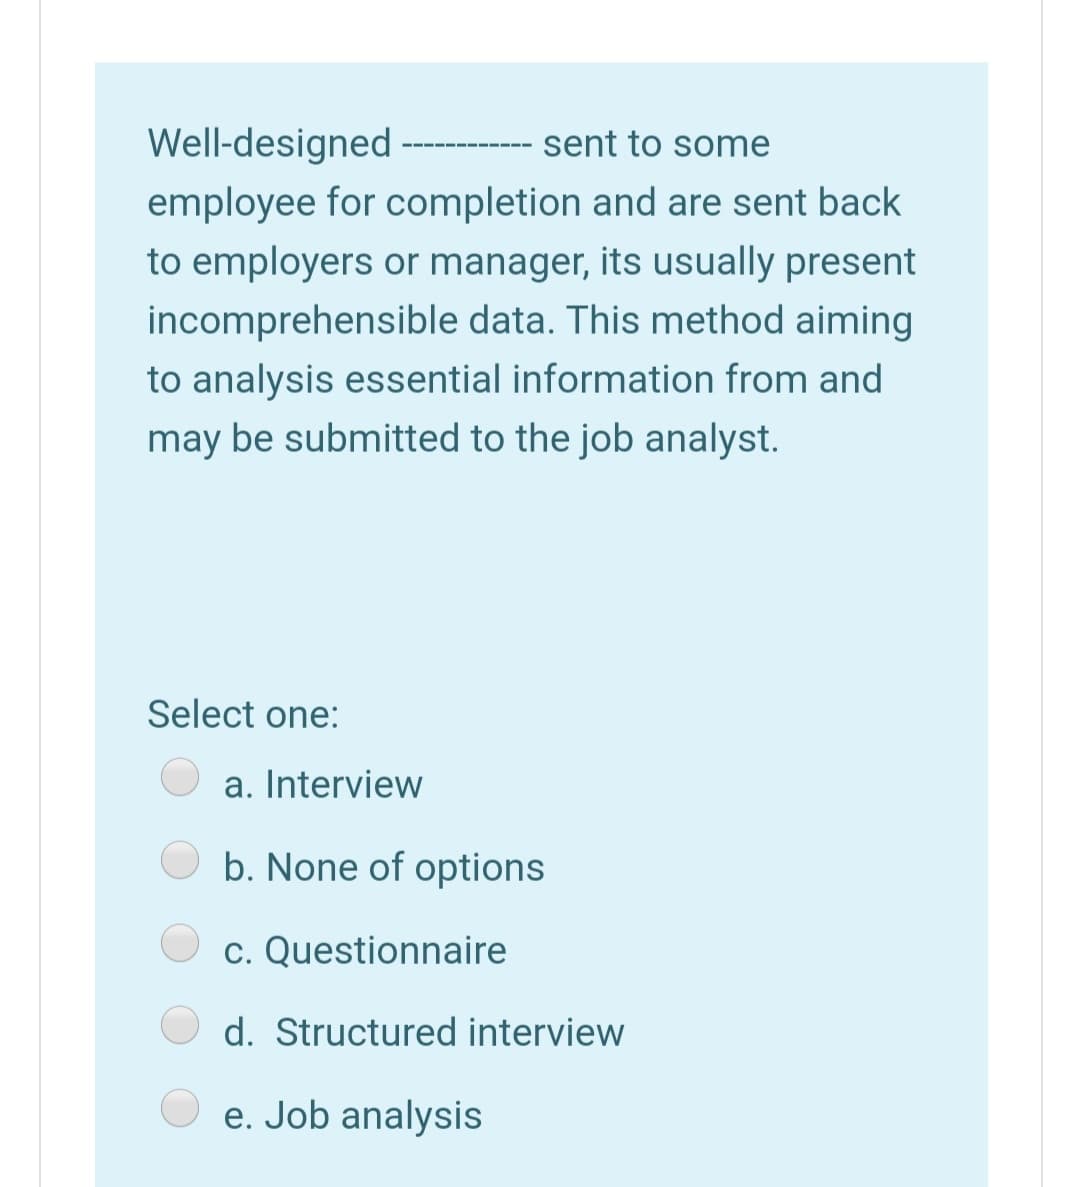 Well-designed
sent to some
employee for completion and are sent back
to employers or manager, its usually present
incomprehensible data. This method aiming
to analysis essential information from and
may be submitted to the job analyst.
Select one:
a. Interview
b. None of options
c. Questionnaire
d. Structured interview
e. Job analysis
